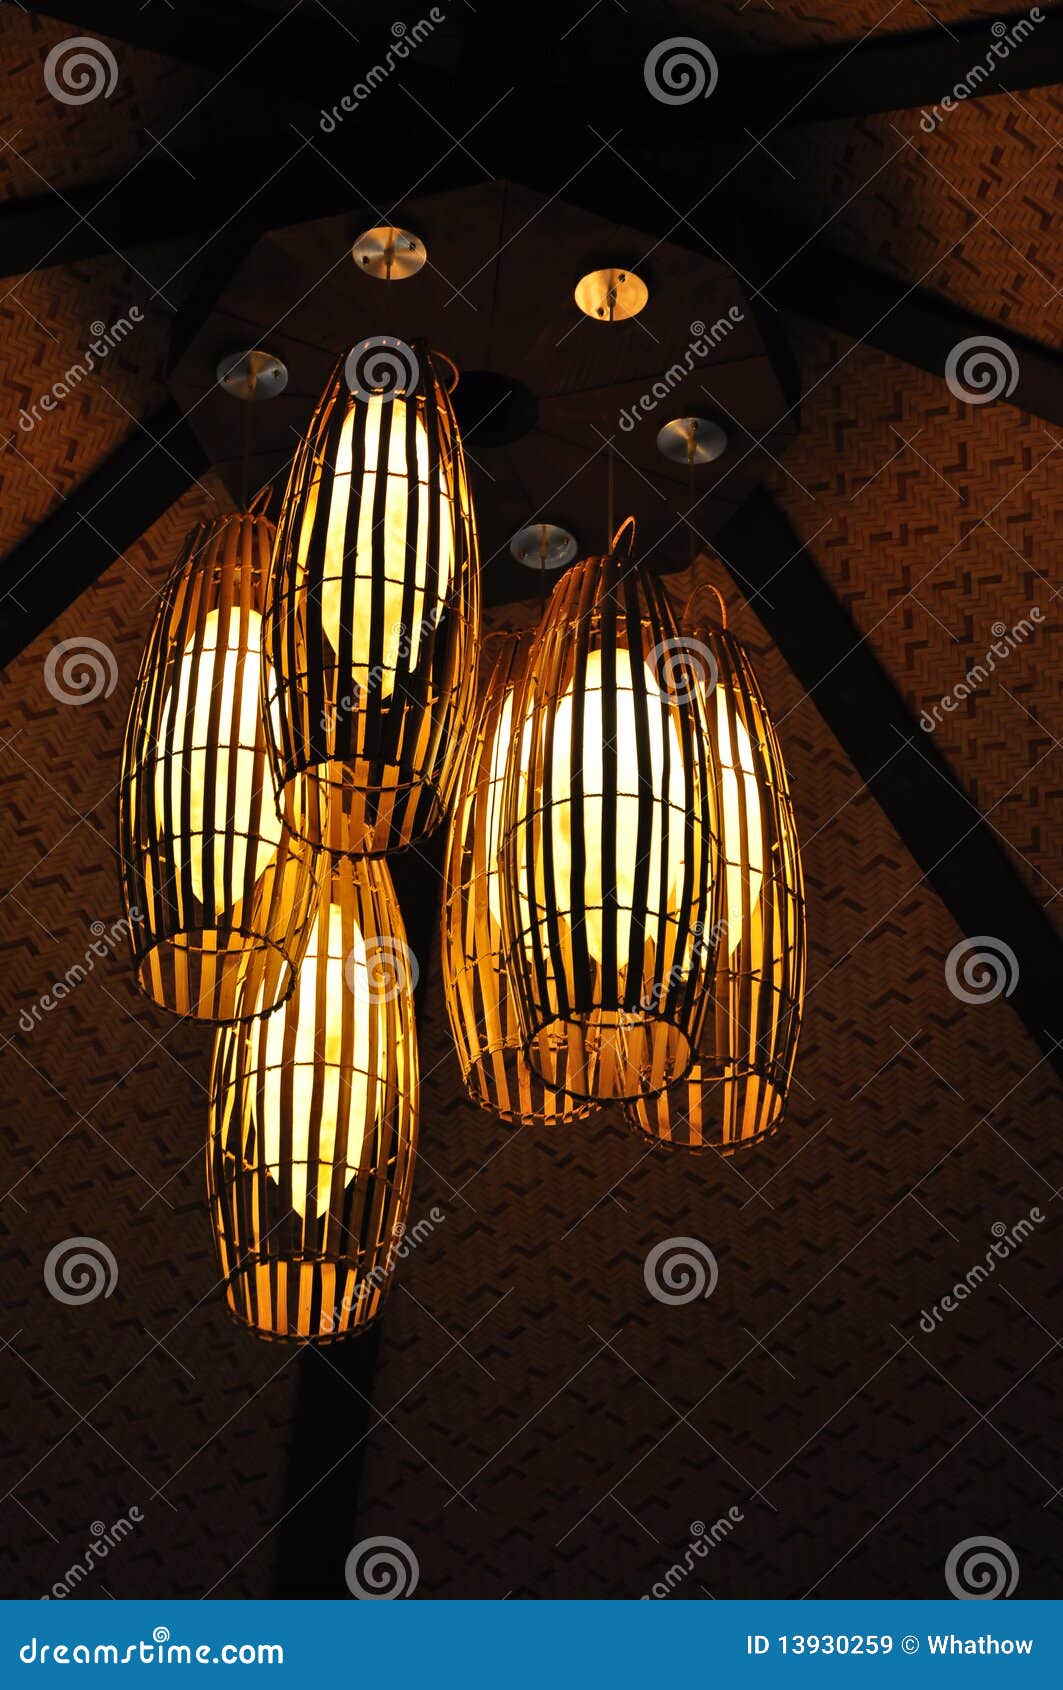 Ceiling Light With Bamboo Cane Light Shade Stock Image Image Of